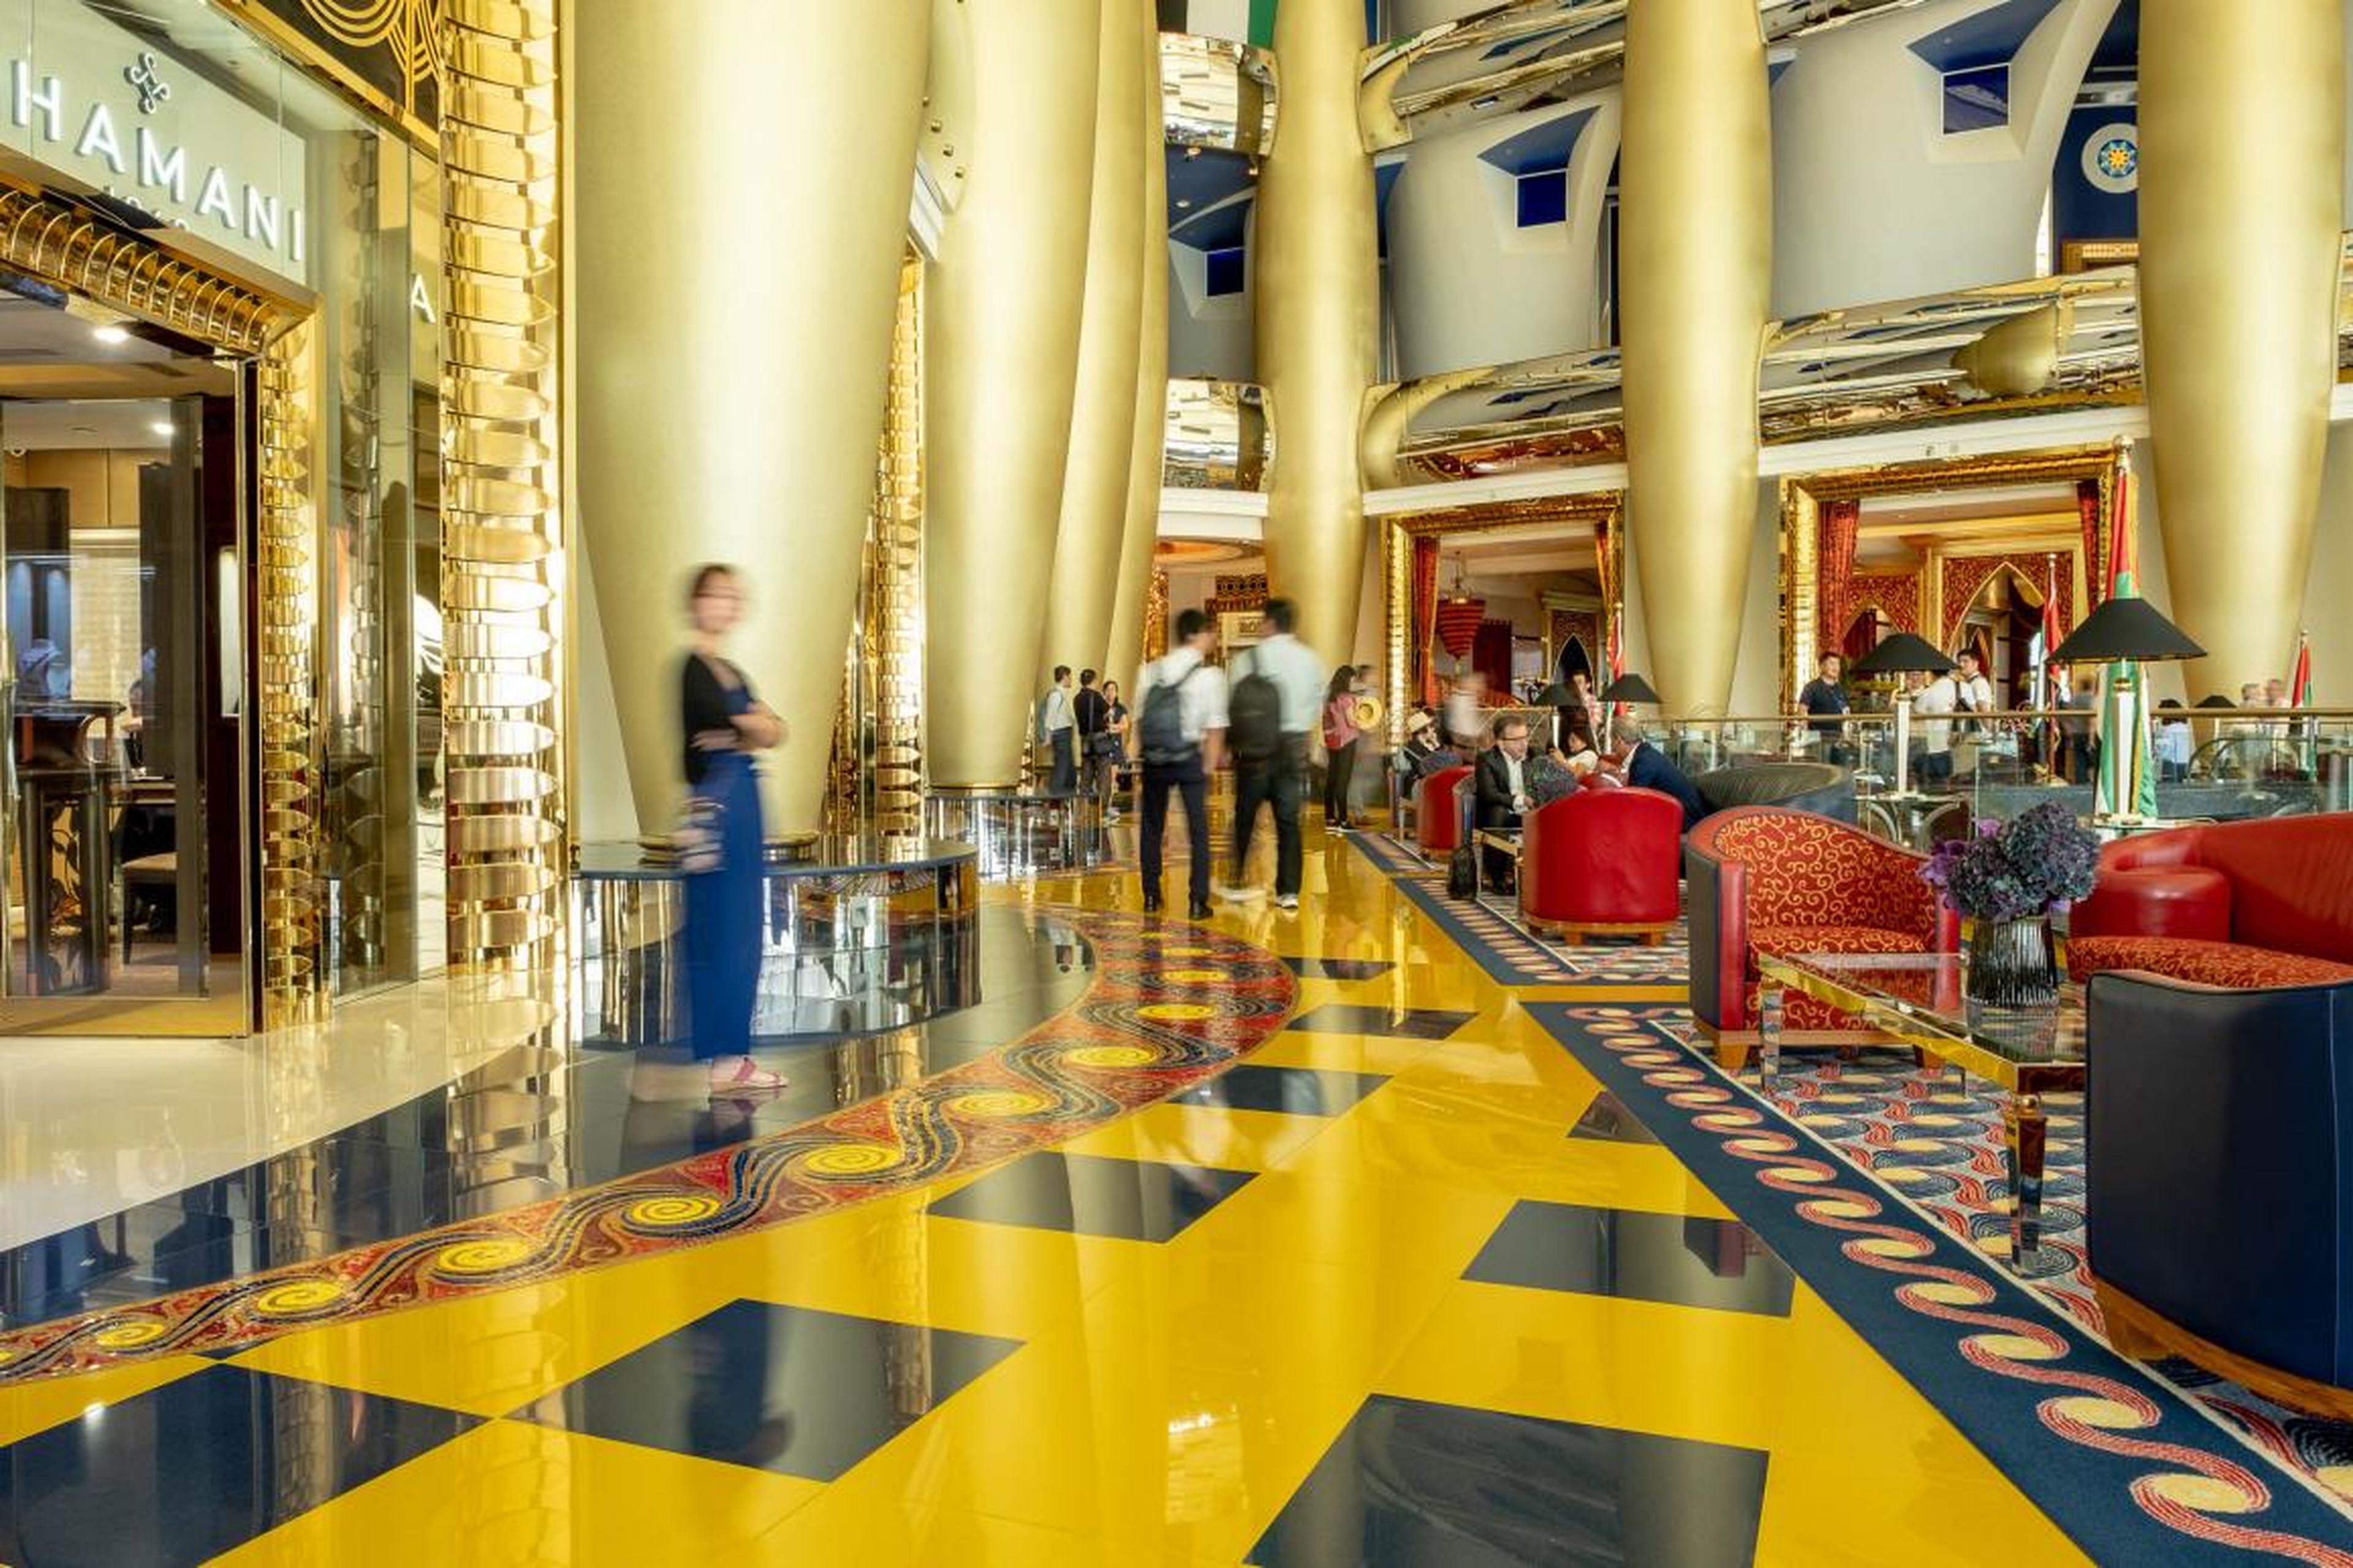 The over-the-top grandeur of the Burj hit me as I entered the atrium. It's not just the gold, though there's plenty of that, but the deep color of the saffron and ultramarine tiles and the ornate furniture.